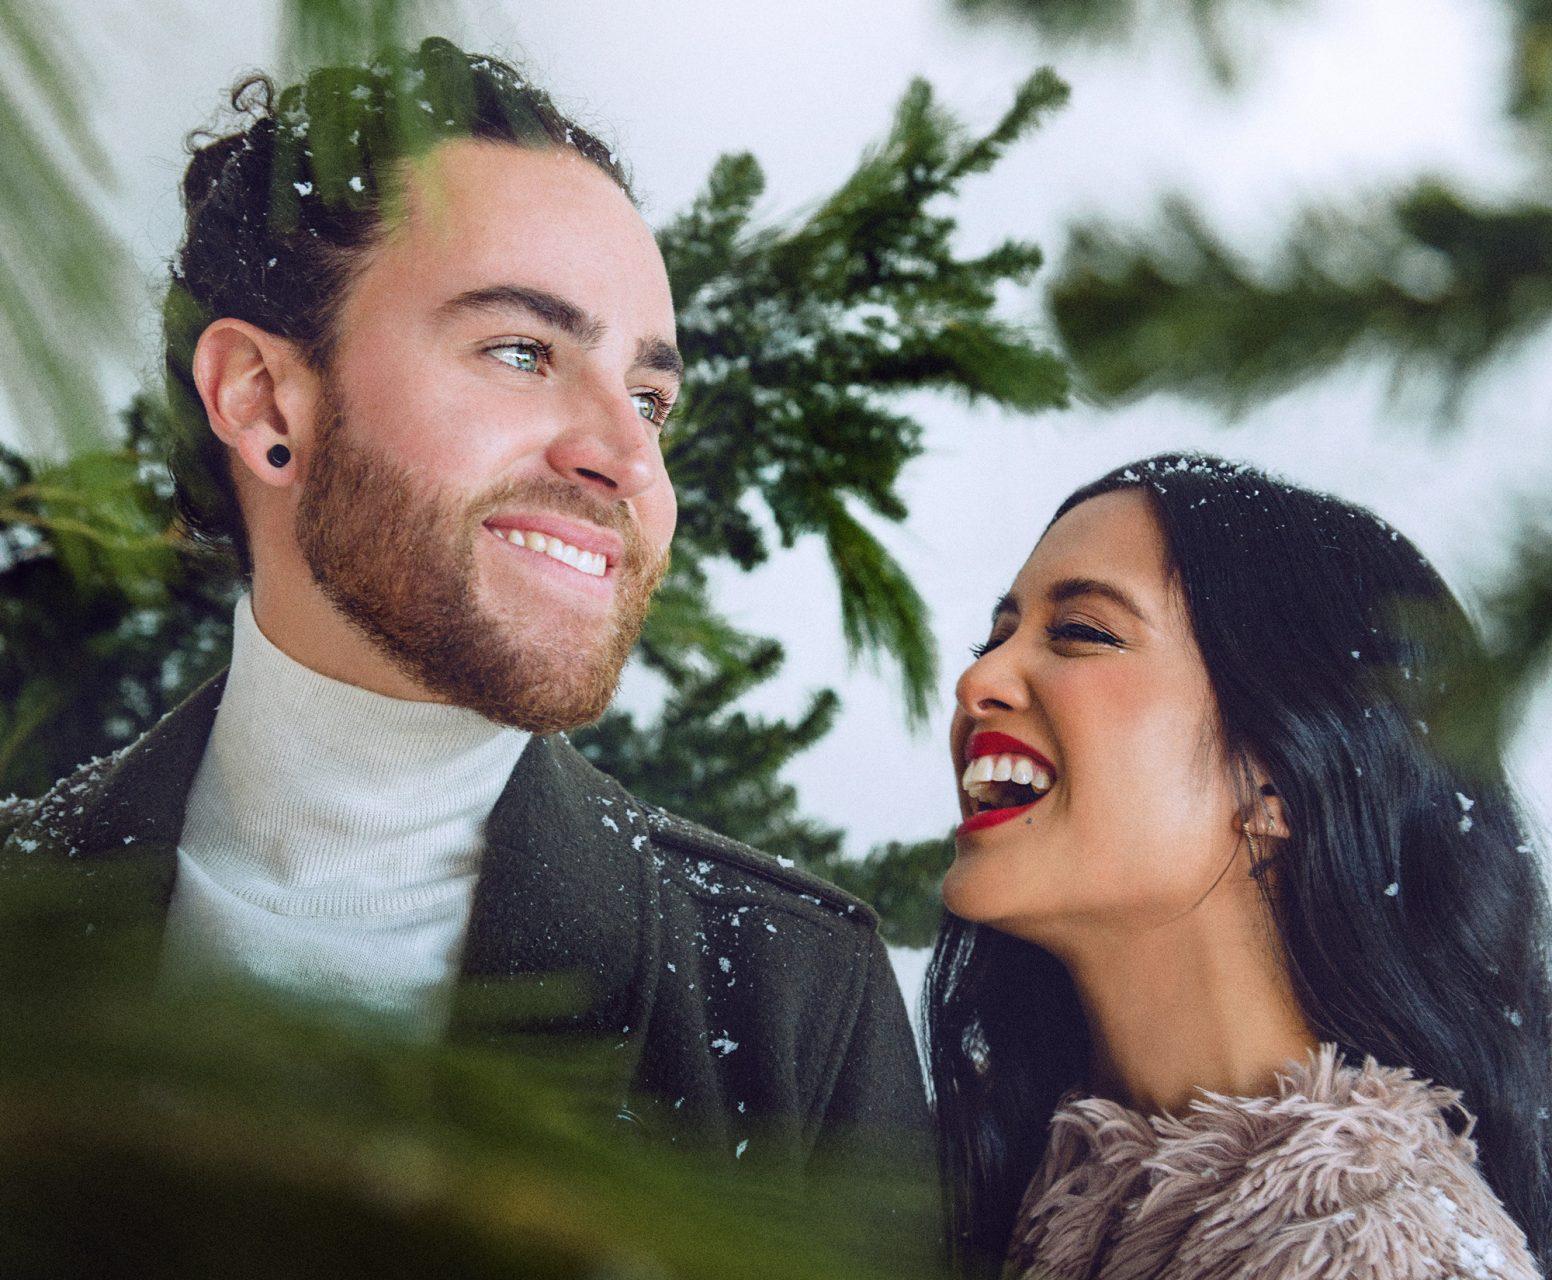 The album cover for Us The Duo’s upcoming release titled “Our Favorite Time of the Year. The album’s release date is Nov. 17, the same day they are performing at the Schaefer Center.